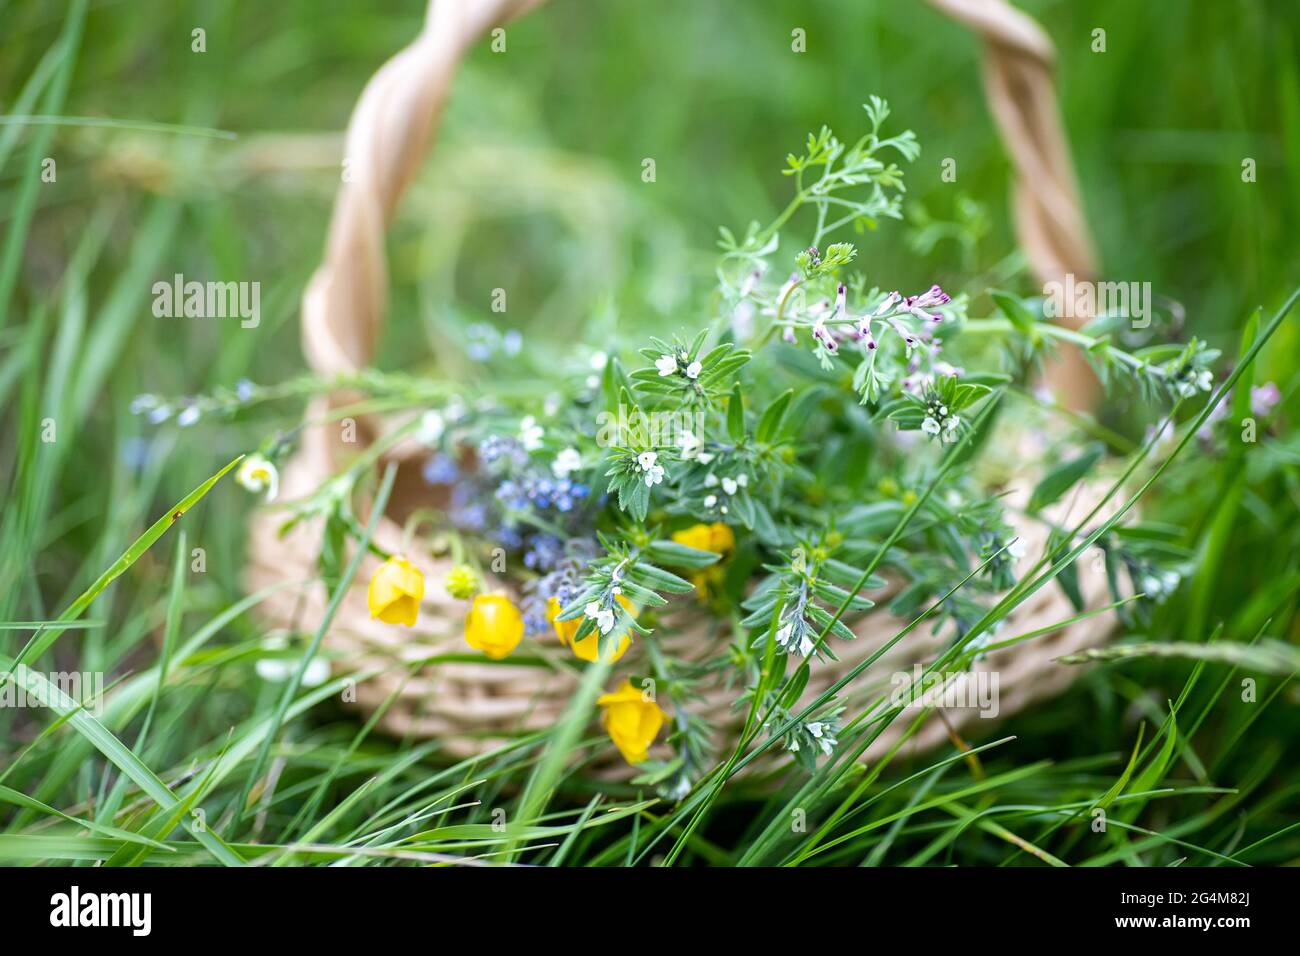 bouquet of medicinal plants in basket. Fumaria officinalis, Myosotis stricta, Ranunculus repens collected for the preparation of potions and infusions Stock Photo